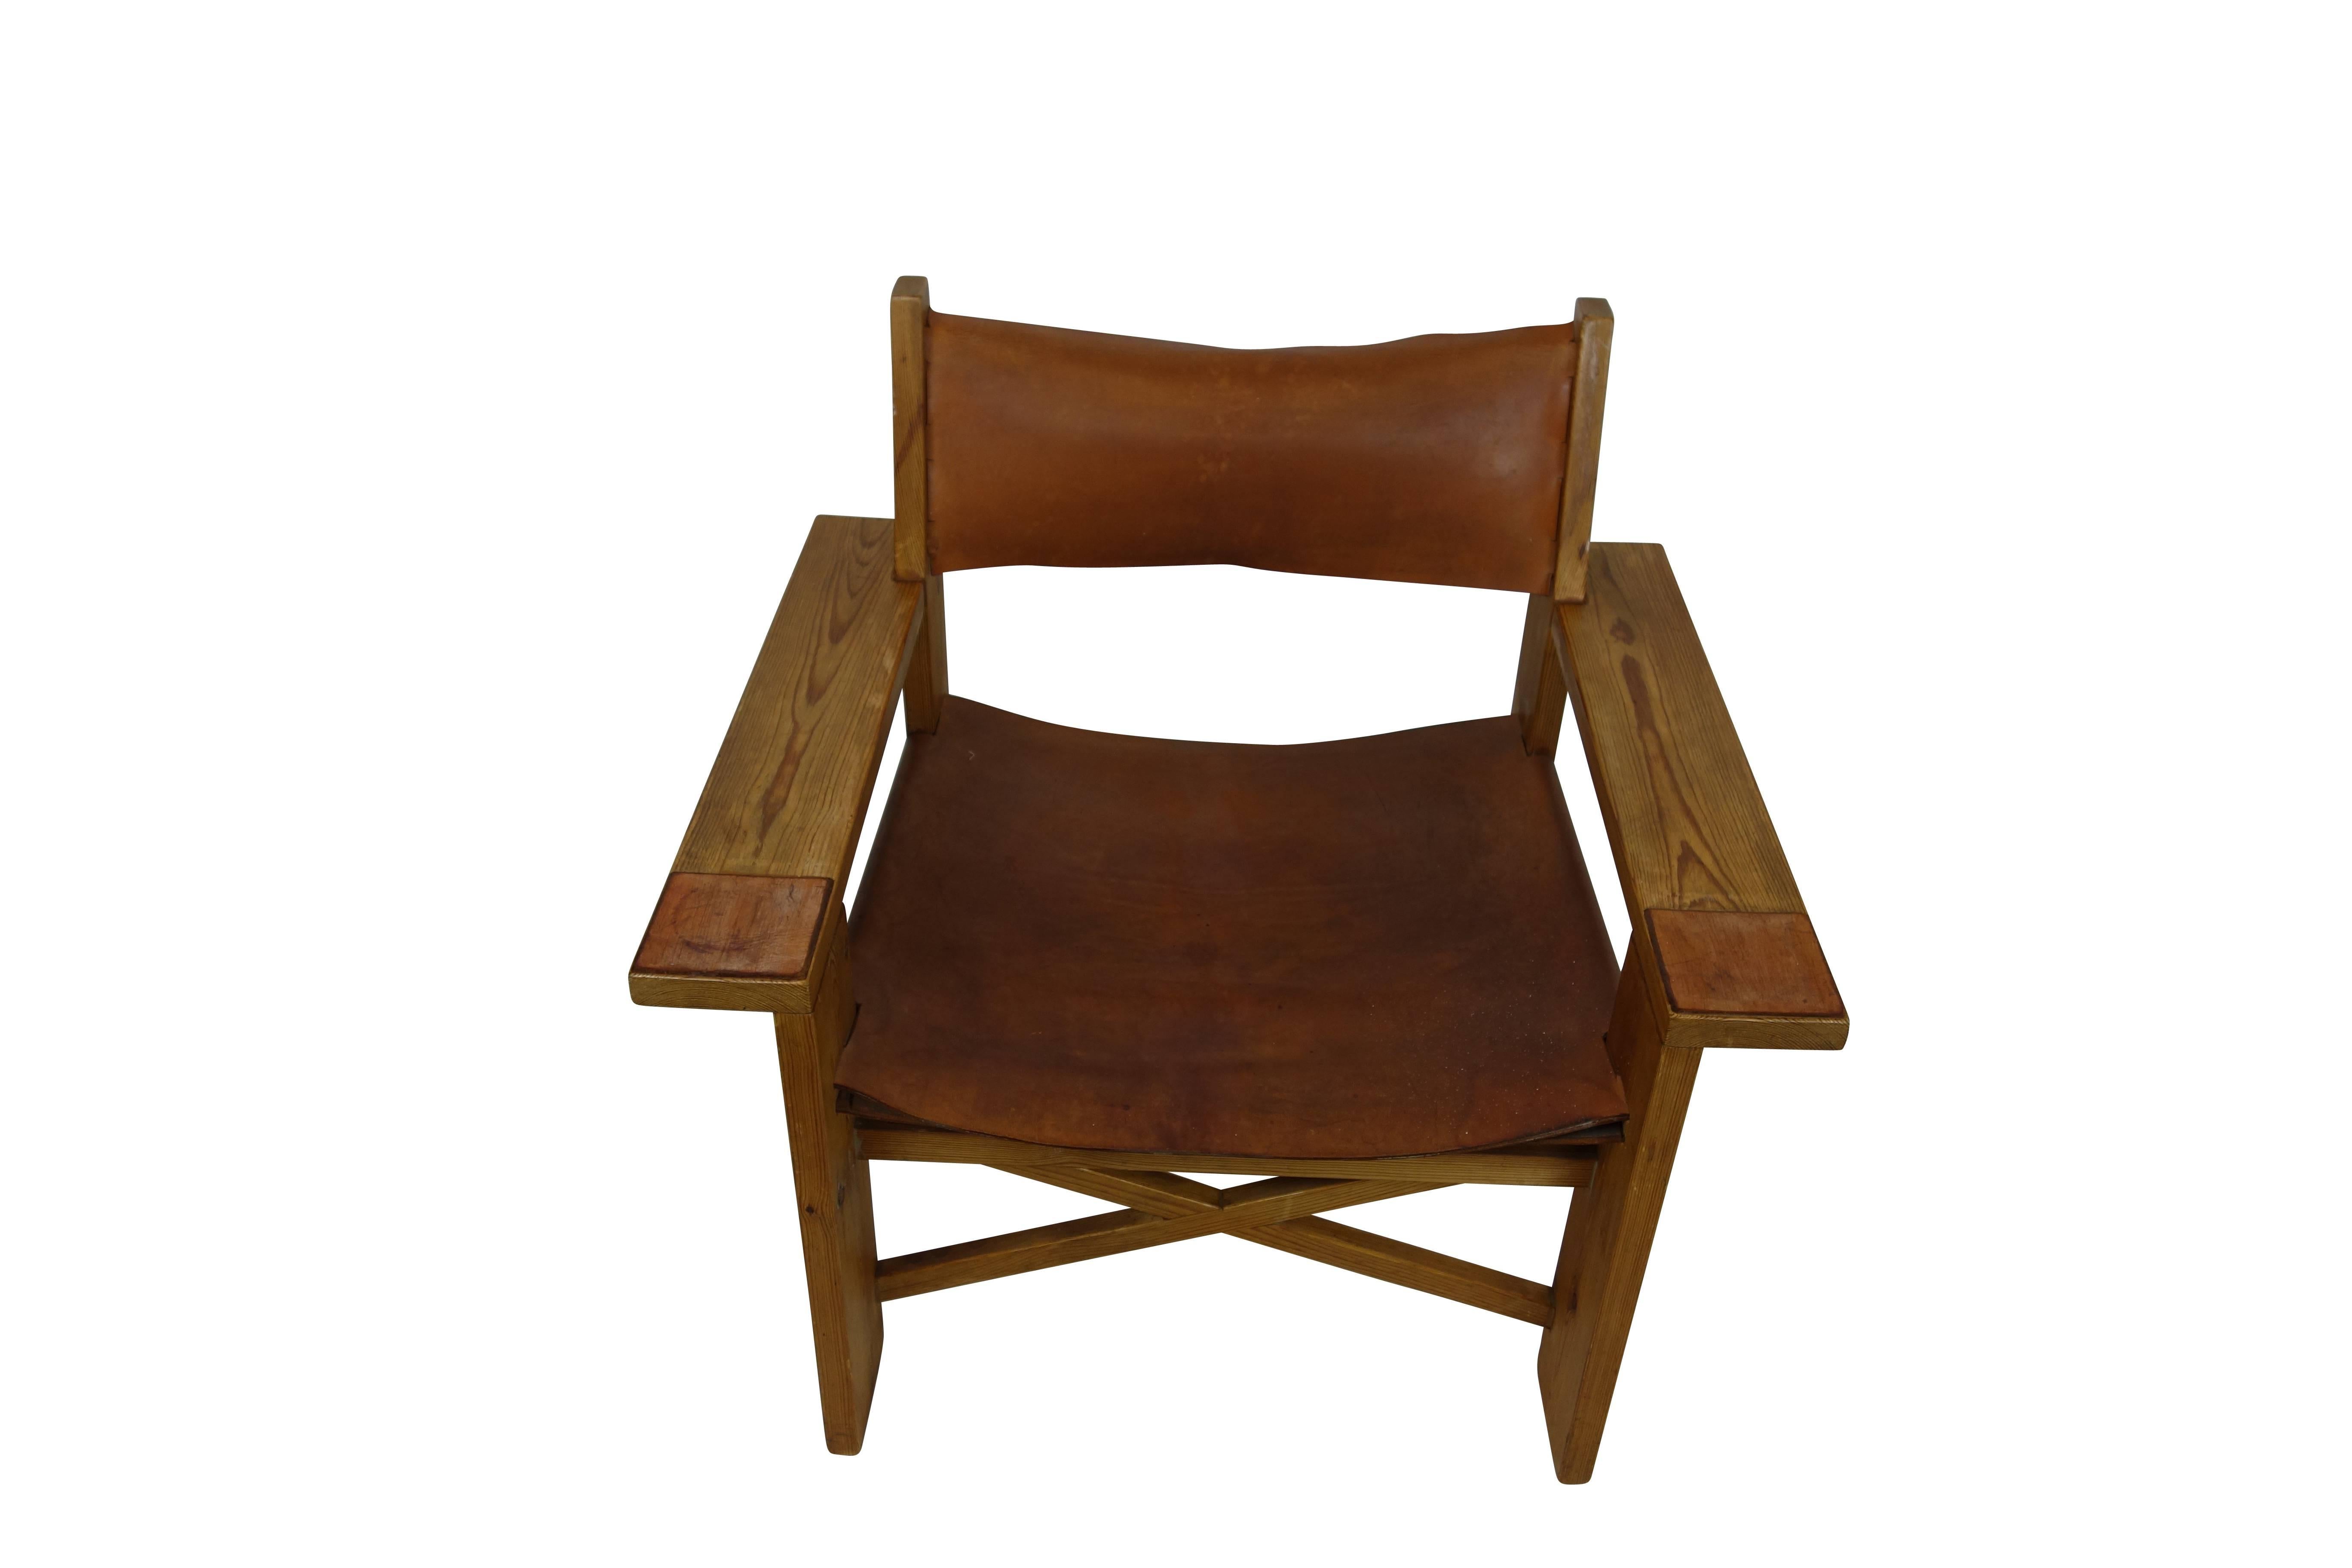 Vintage Danish camping easy chair in the style of Børge Mogensen with original cognac leather sling seat and coasters. Very uncommon, likely a prototype, circa 1950.